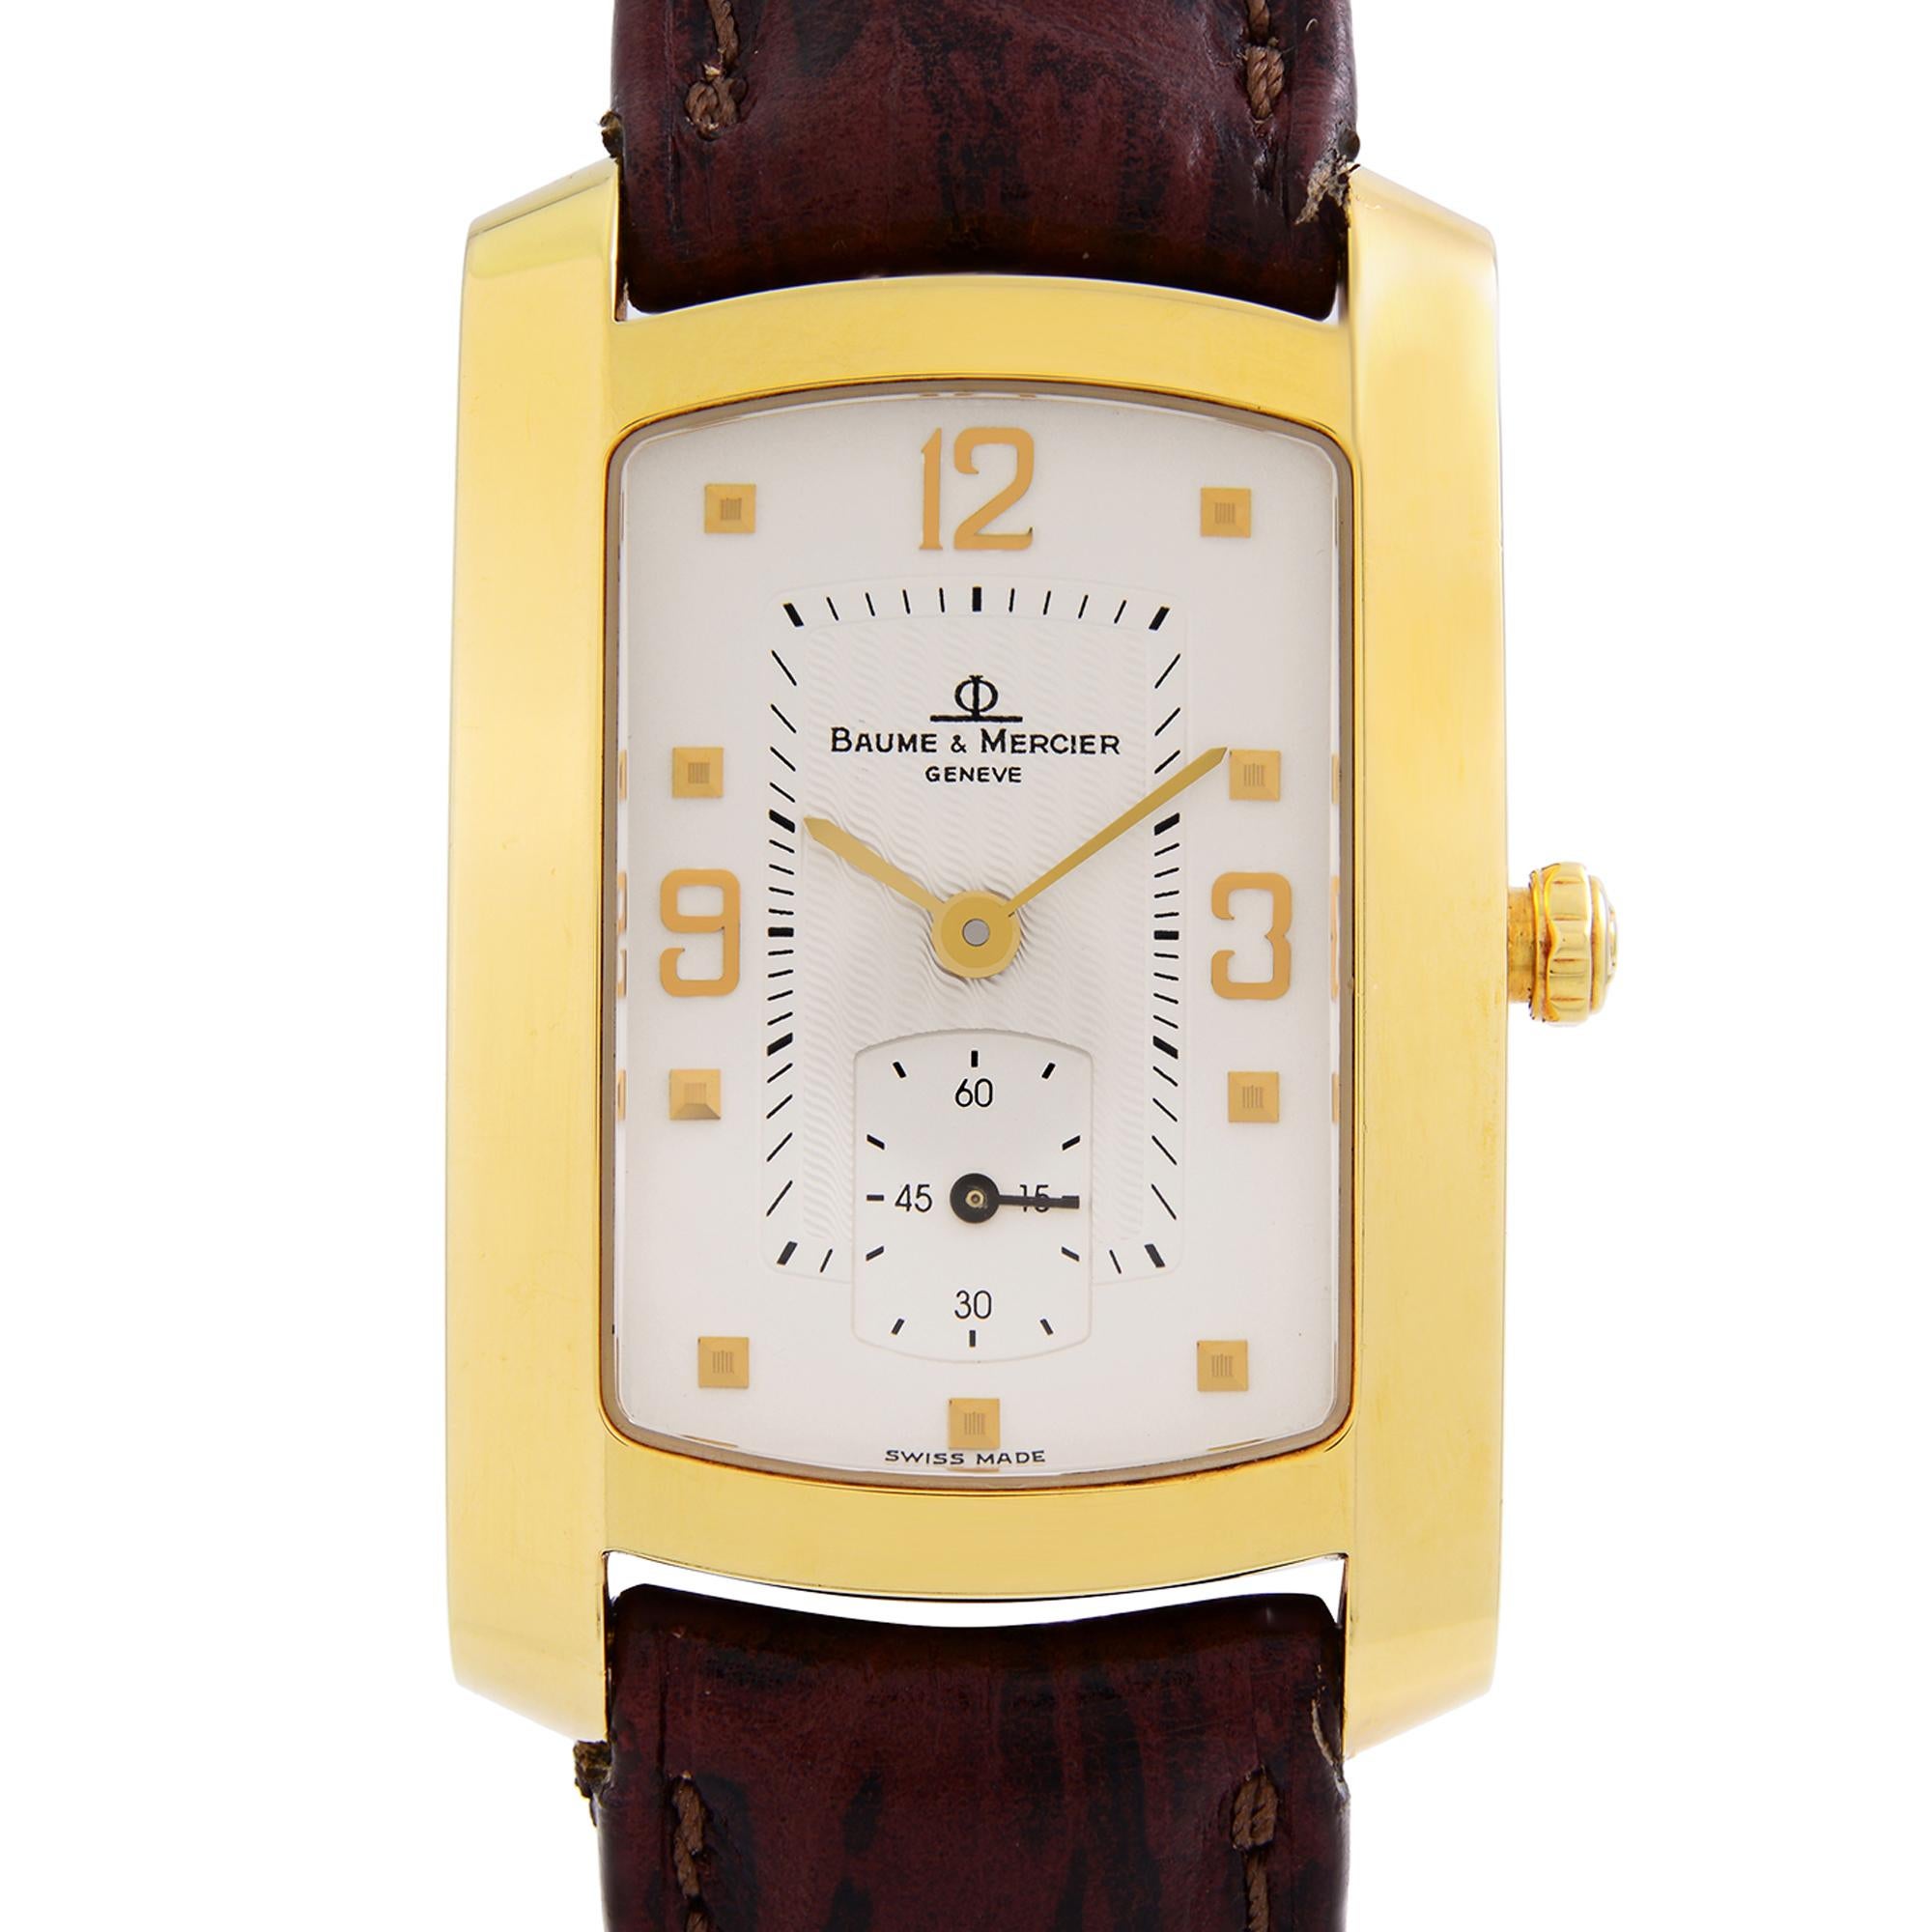 Pre-owned Baume et Mercier Hampton 18K Yellow Gold Quartz Men's Watch. Minor wear signs on a leather band. Original Box and Papers are not included comes with a Chronostore presentation box and authenticity card. Covered by a one-year Chronostore